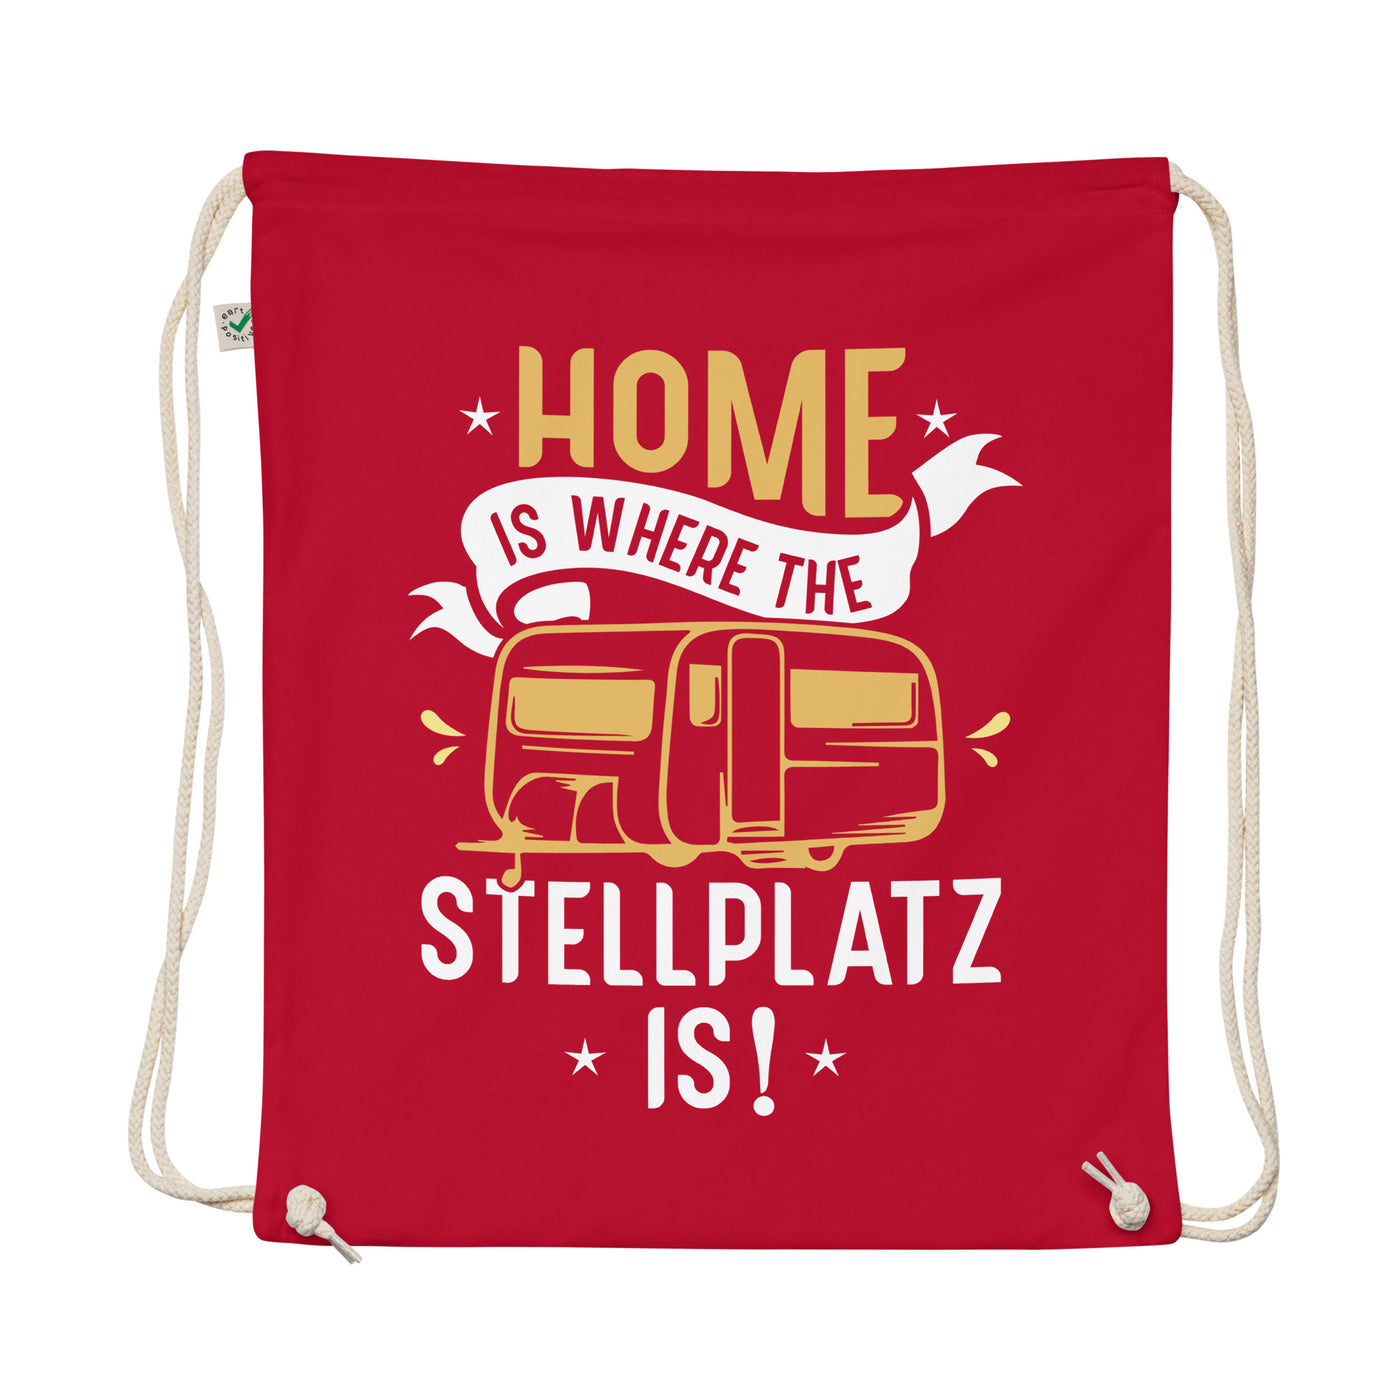 Home Is Where The Stellplatz Is - Organic Turnbeutel camping